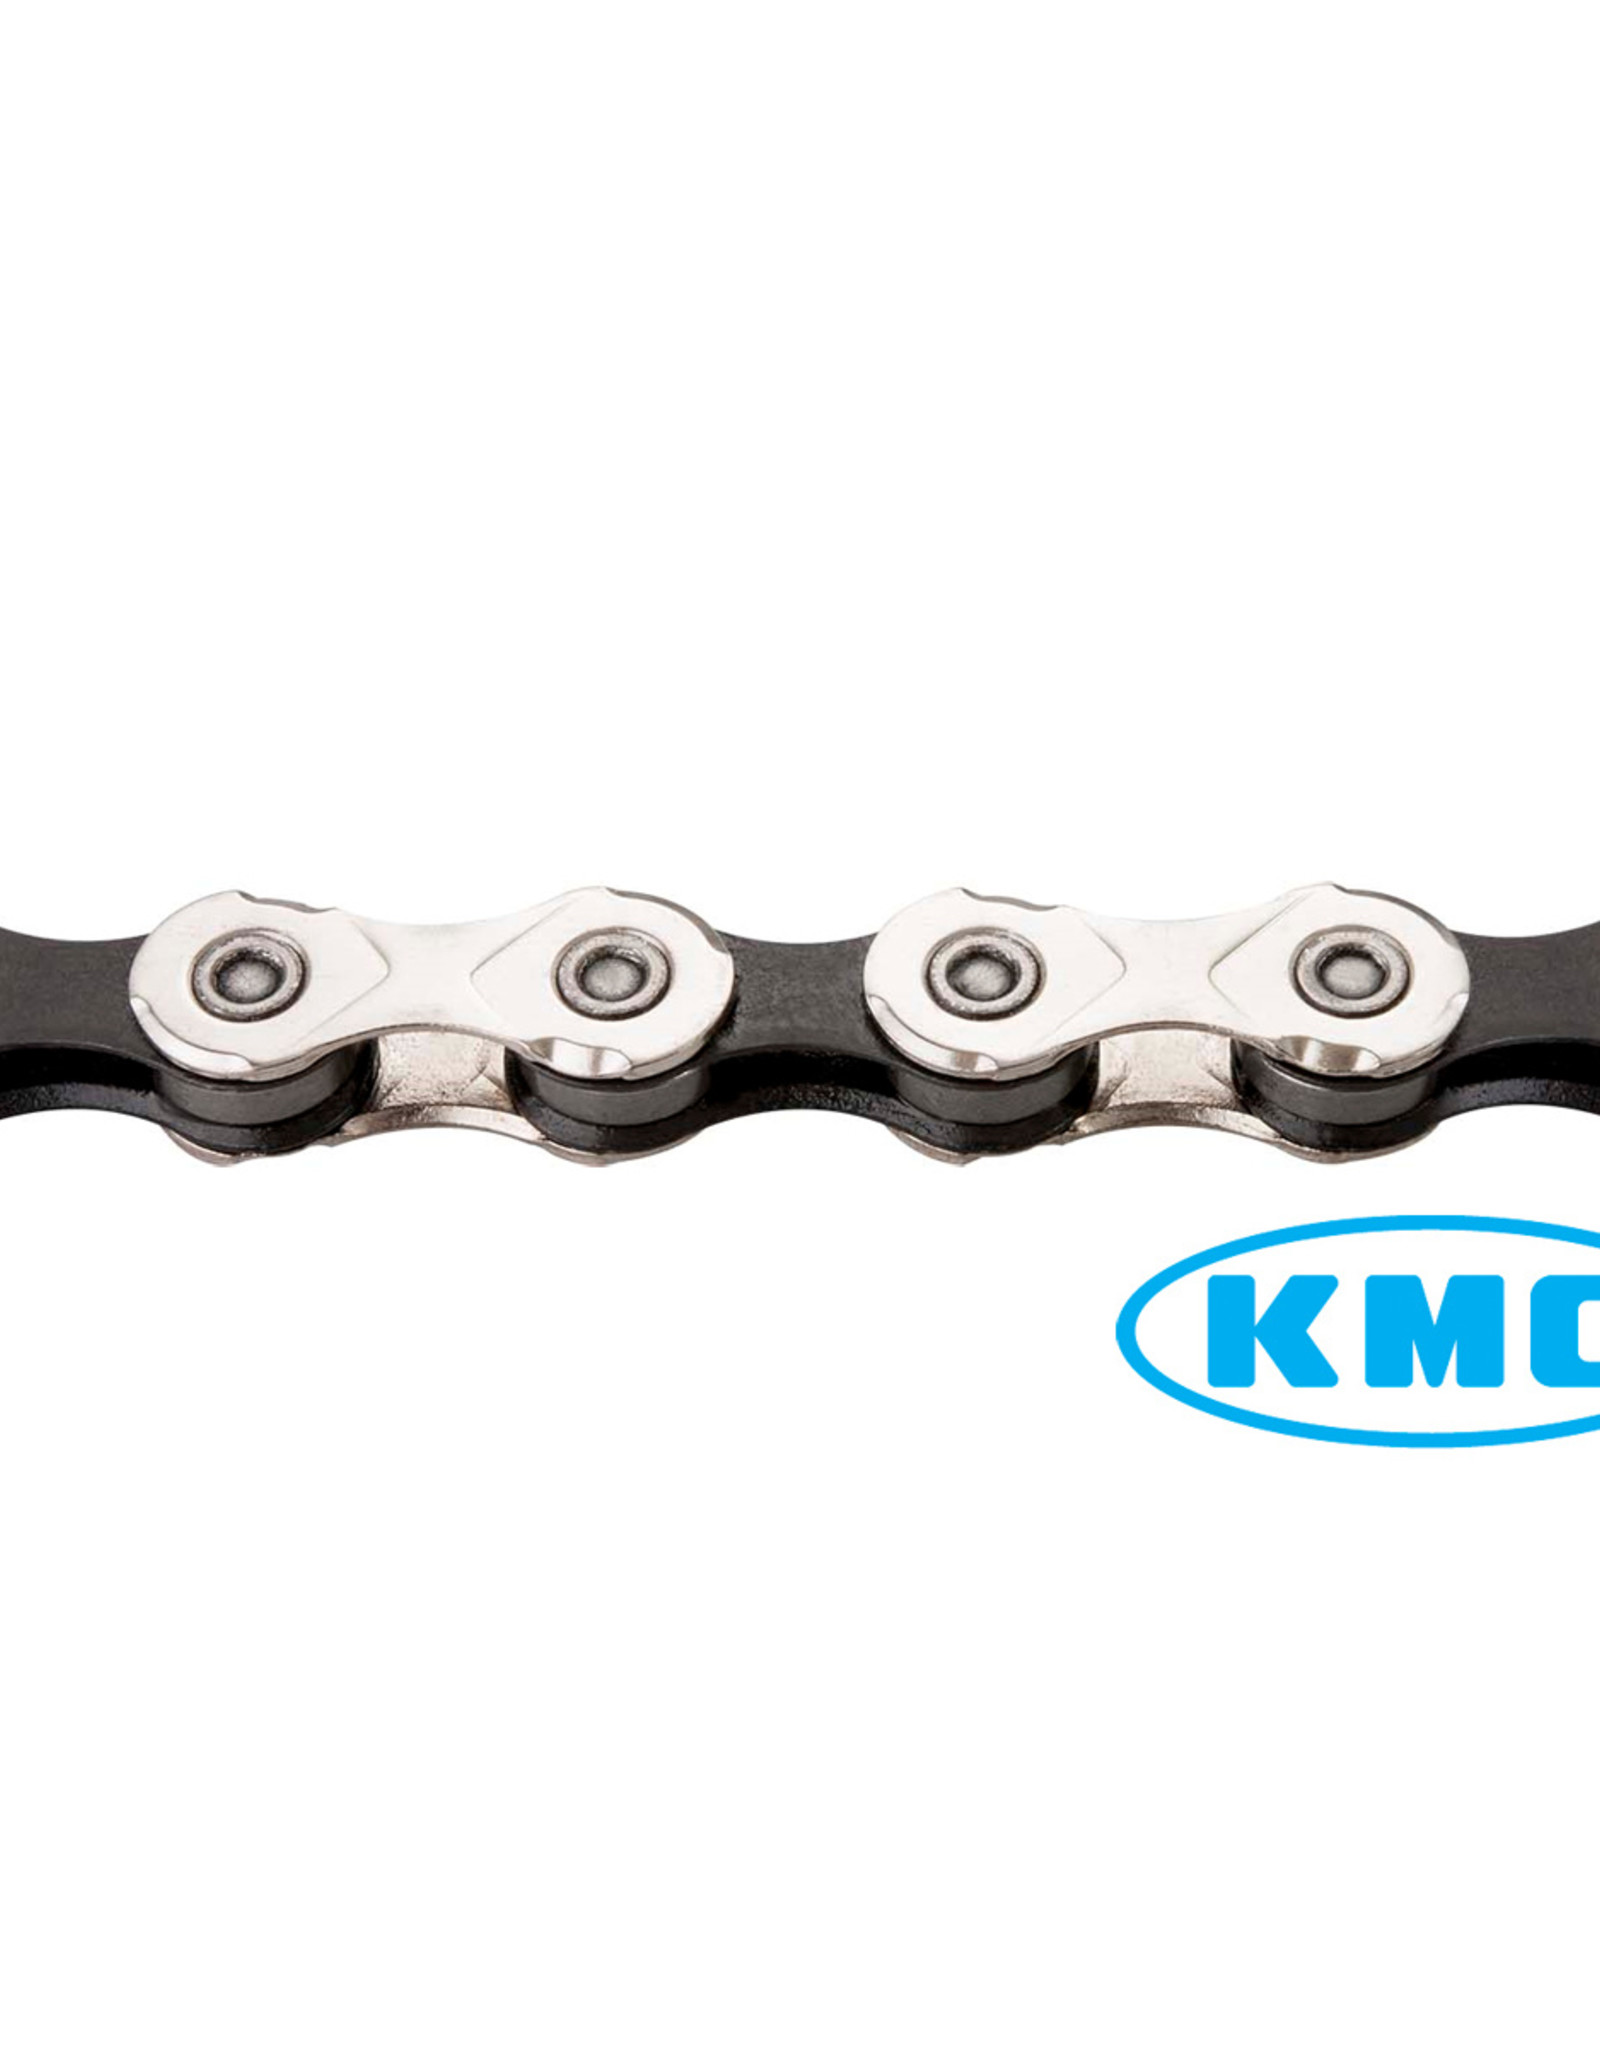 KMC X11 - 11 Speed Chain in Silver/Black (Loose)